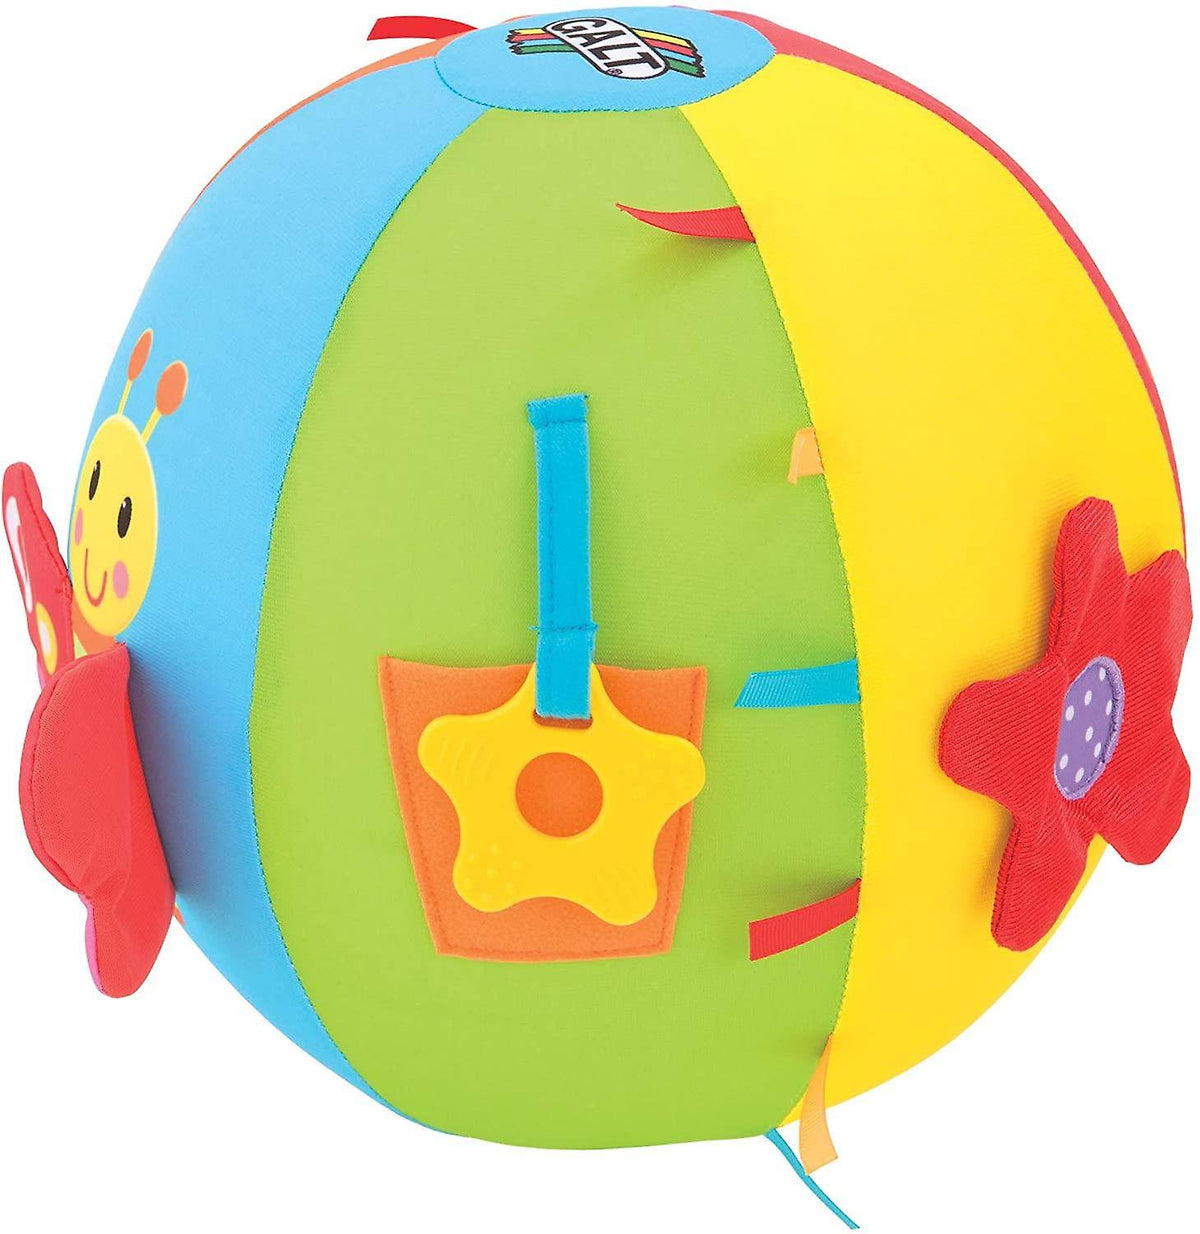 Activity Ball: Fabric Covered inflatable ball